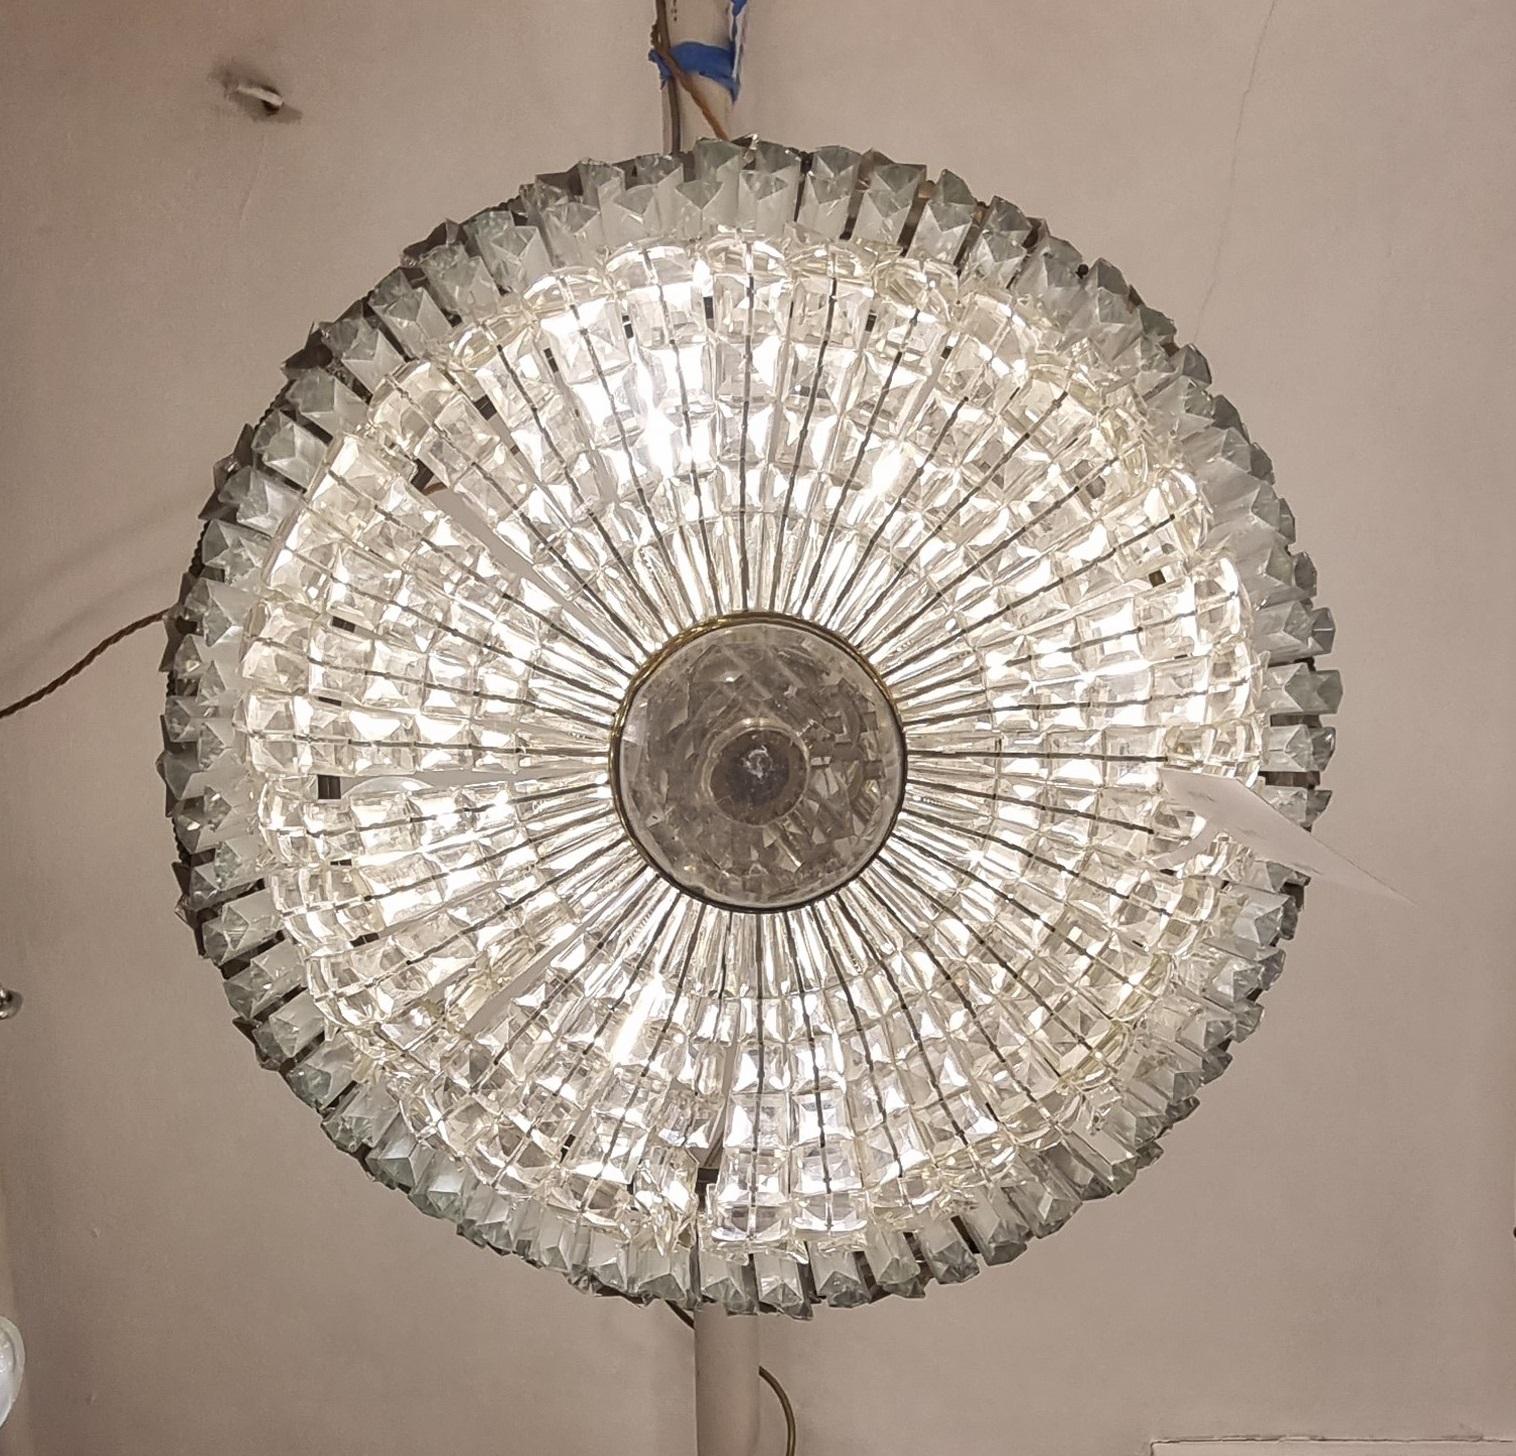 A beautiful decorative plafonnier suitable for modern housing as it fits close to the ceiling and gives a beautiful spread of light from its 9 internal bulbs. The silver coloured frame is surrounded by crystal stars affixed to the upper tier from